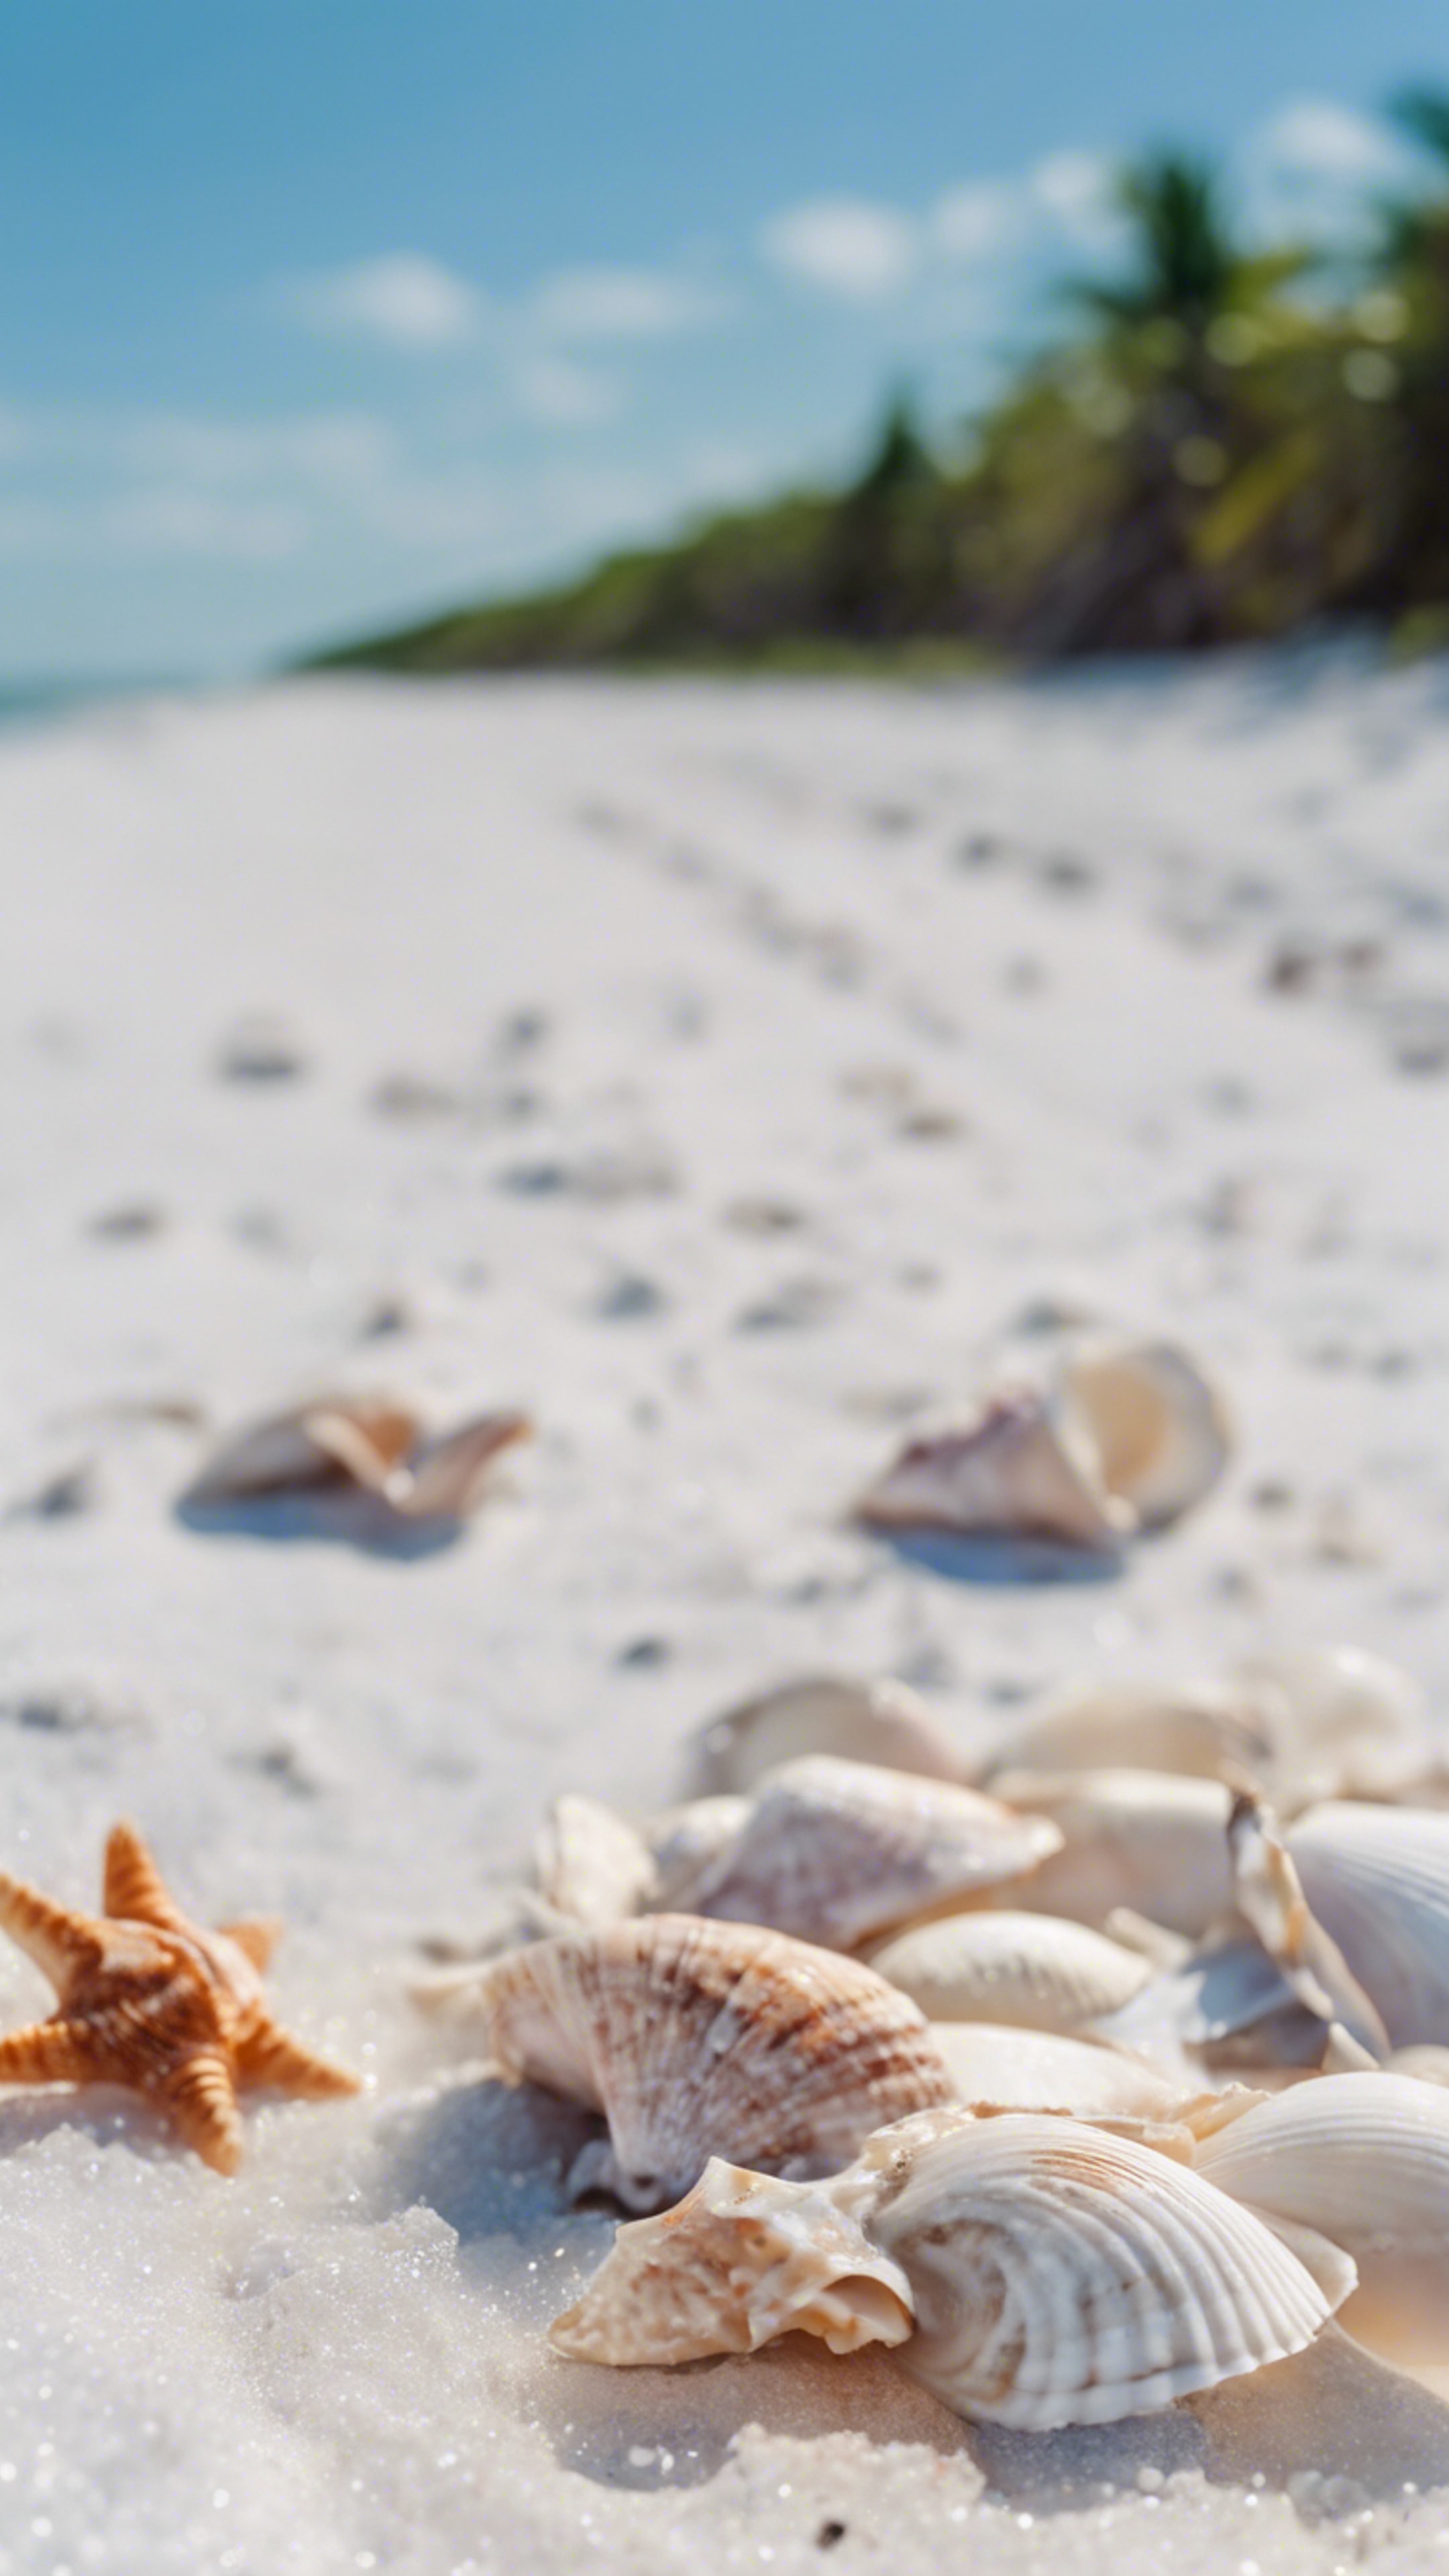 Seashells scattered along the pure white sandy beaches of Sanibel Island under clear, blue skies. 牆紙[1c53aef66a12437c830d]